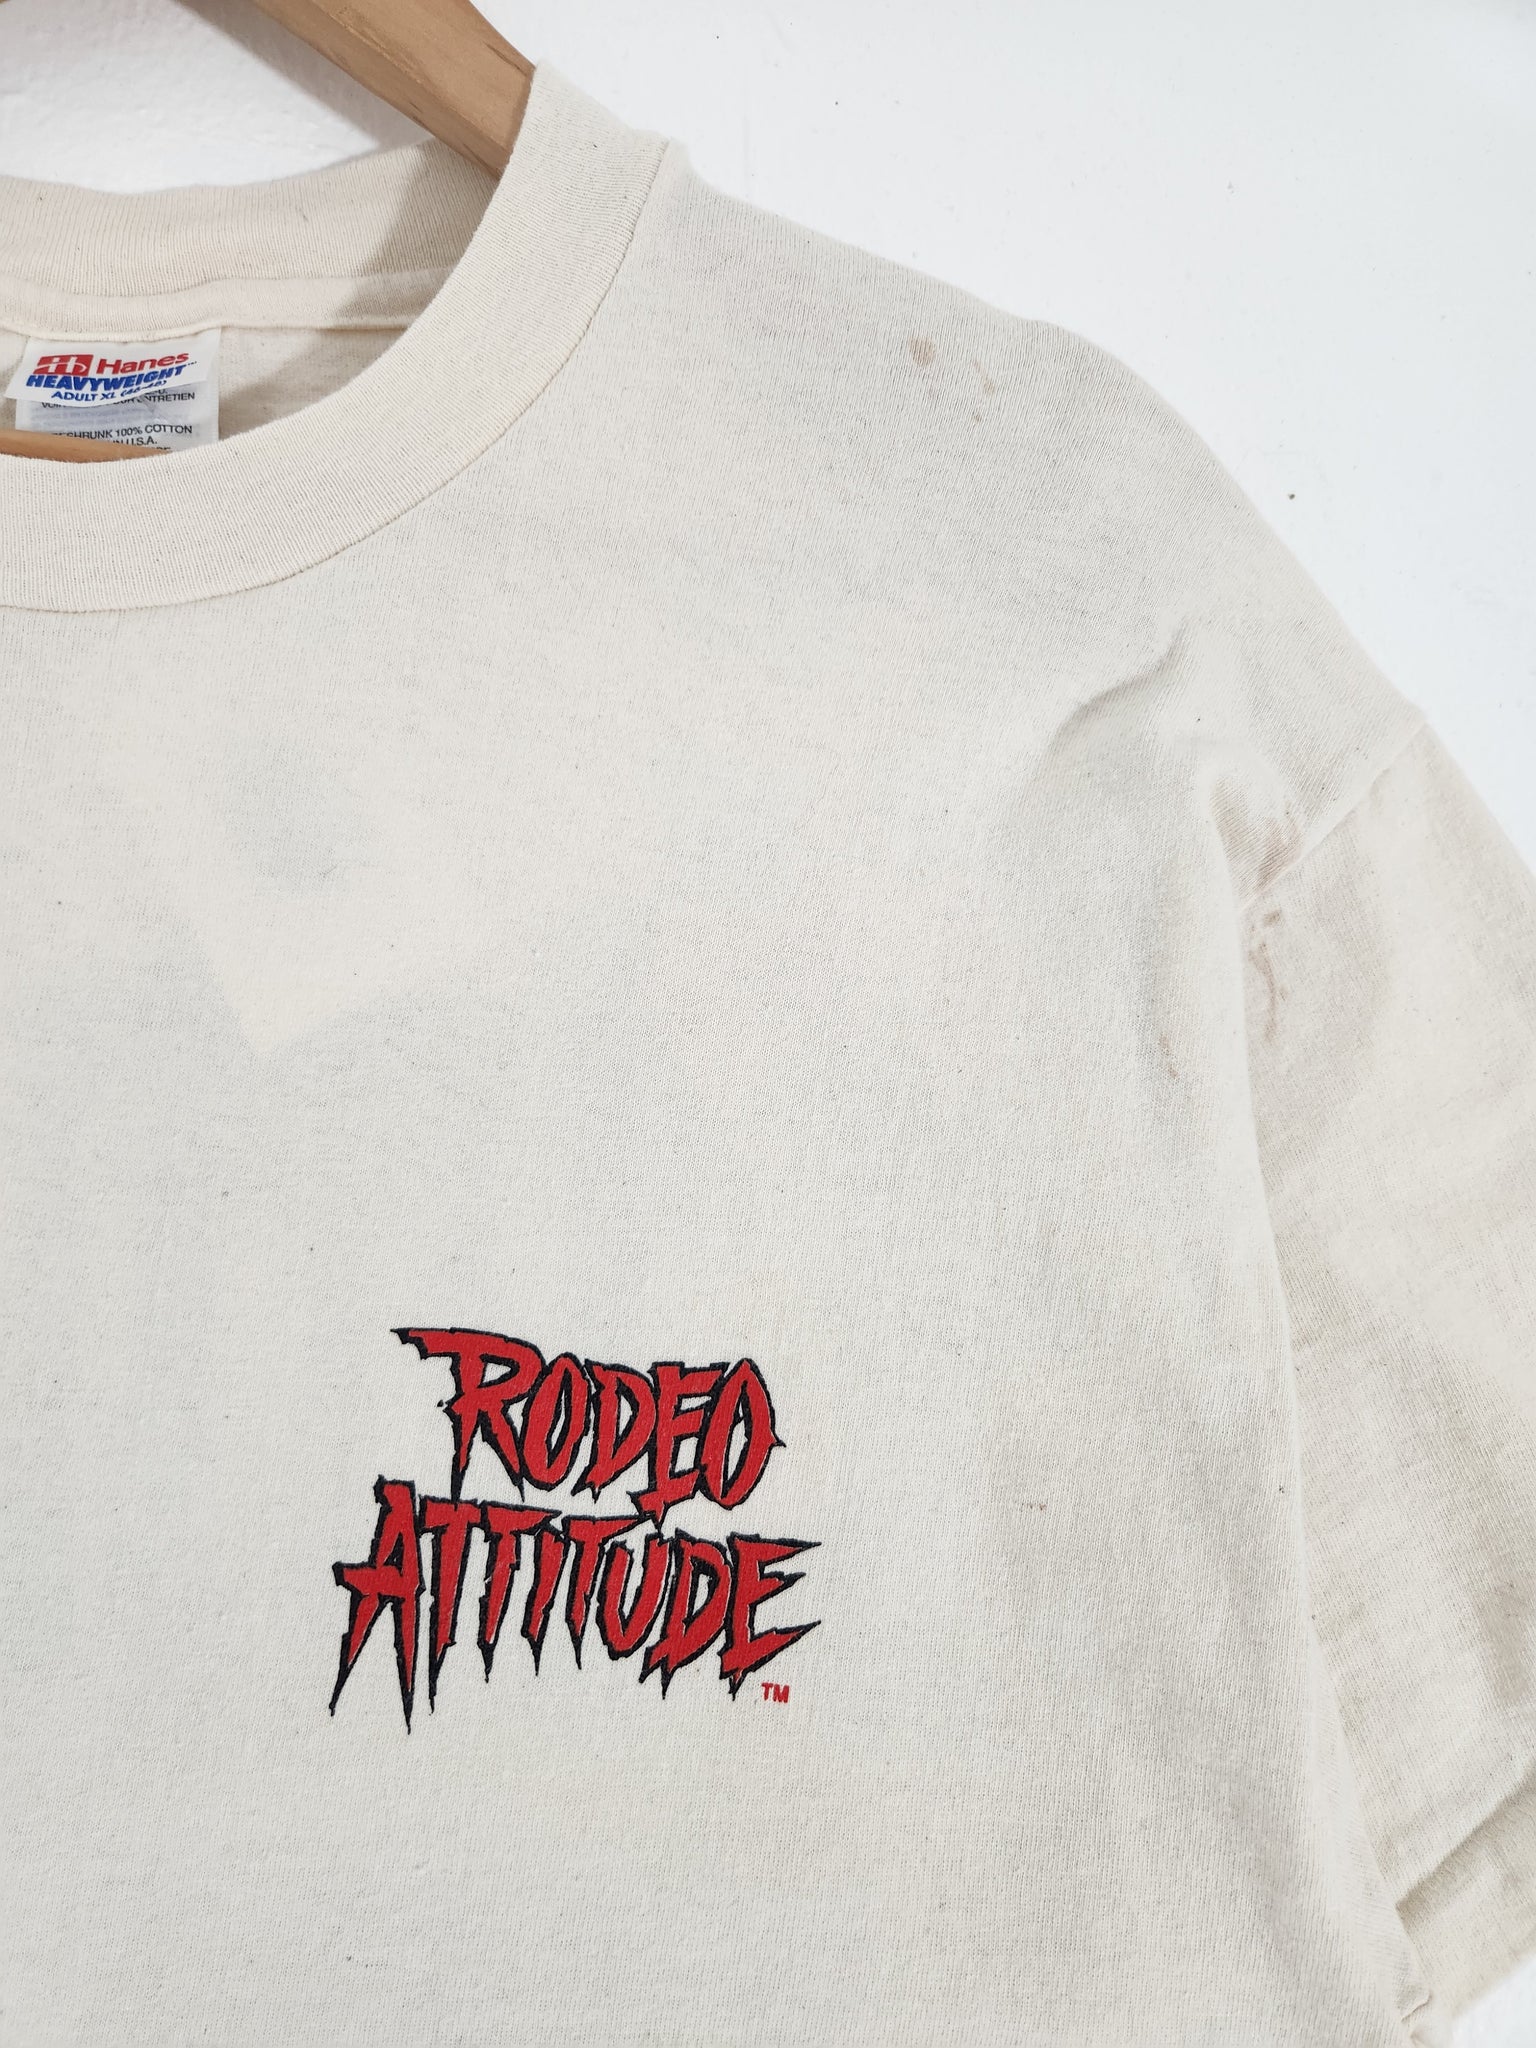 1990’s “RODEO” Printed T-Shirtトップス